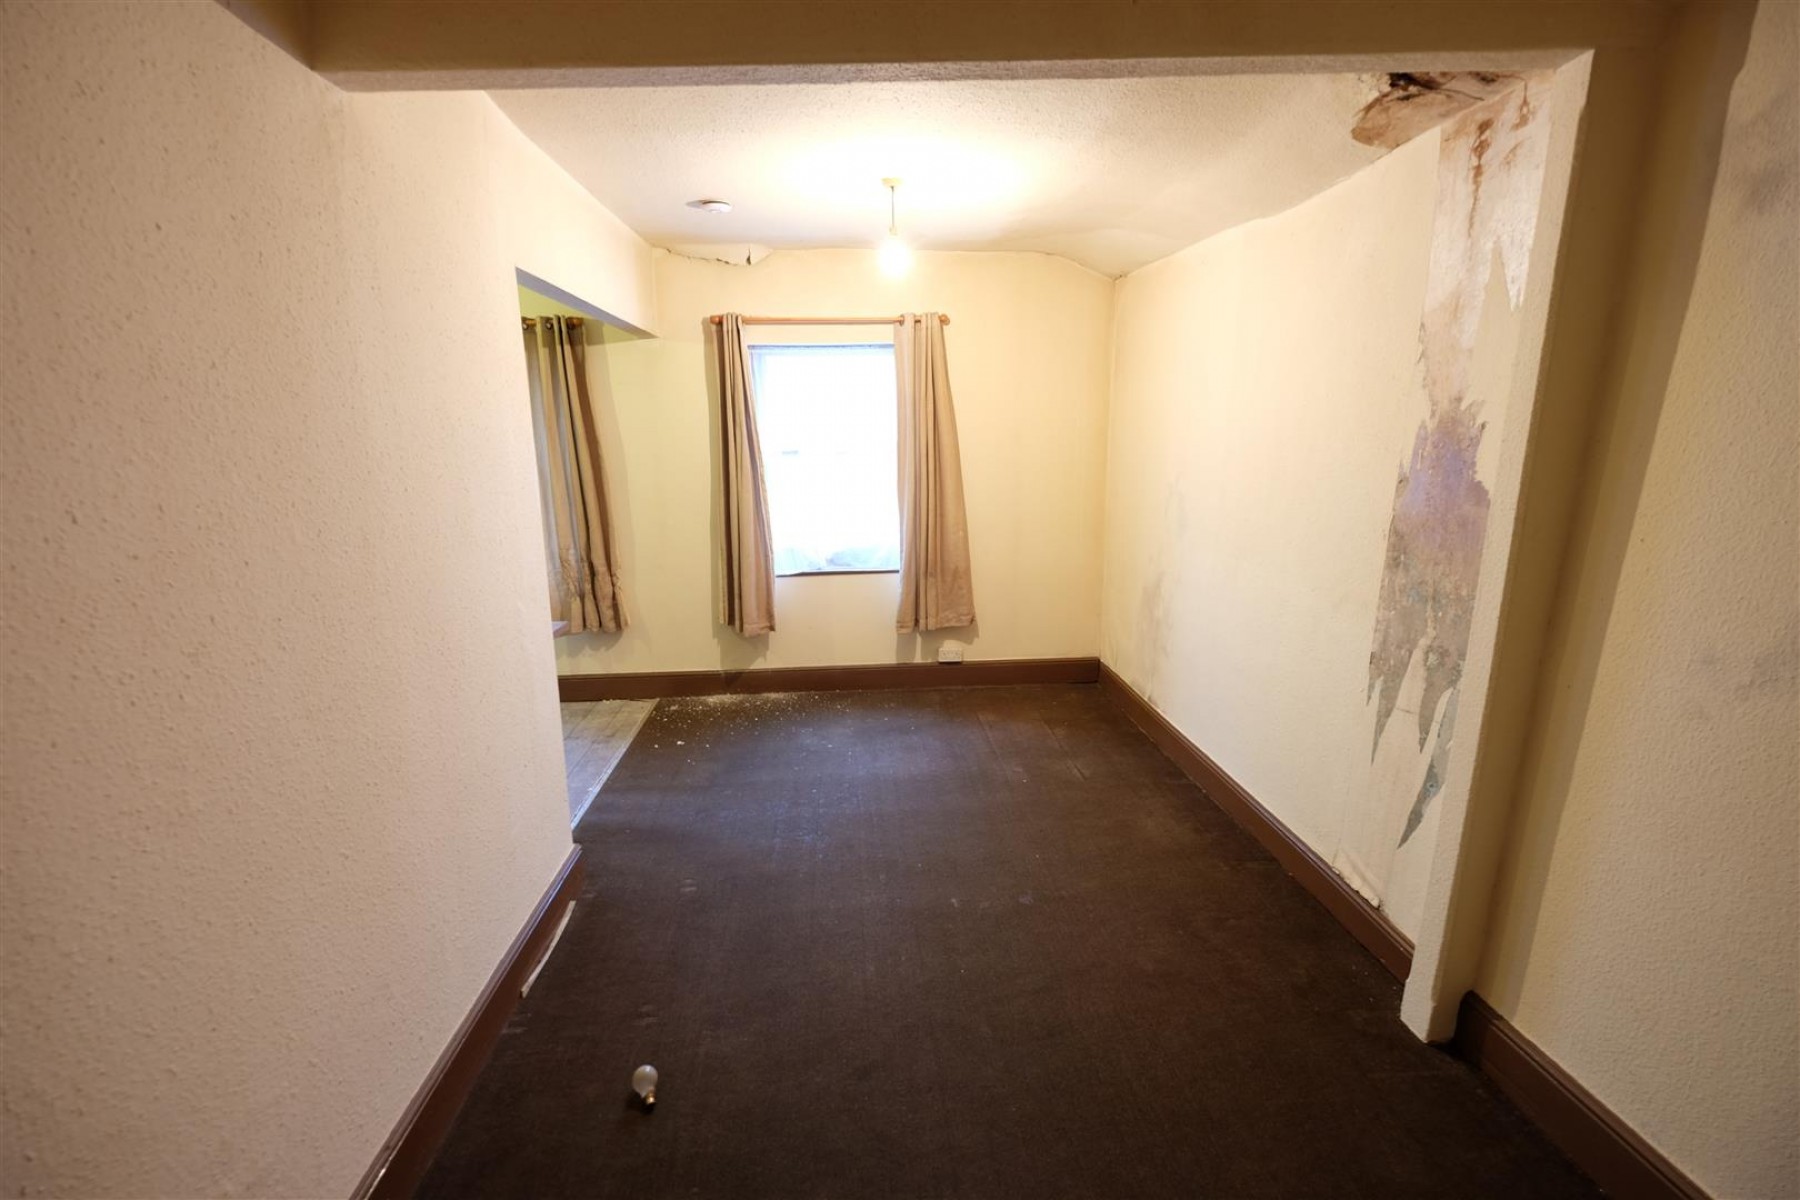 Images for 1 BED FLAT - REQUIRES UPDATING